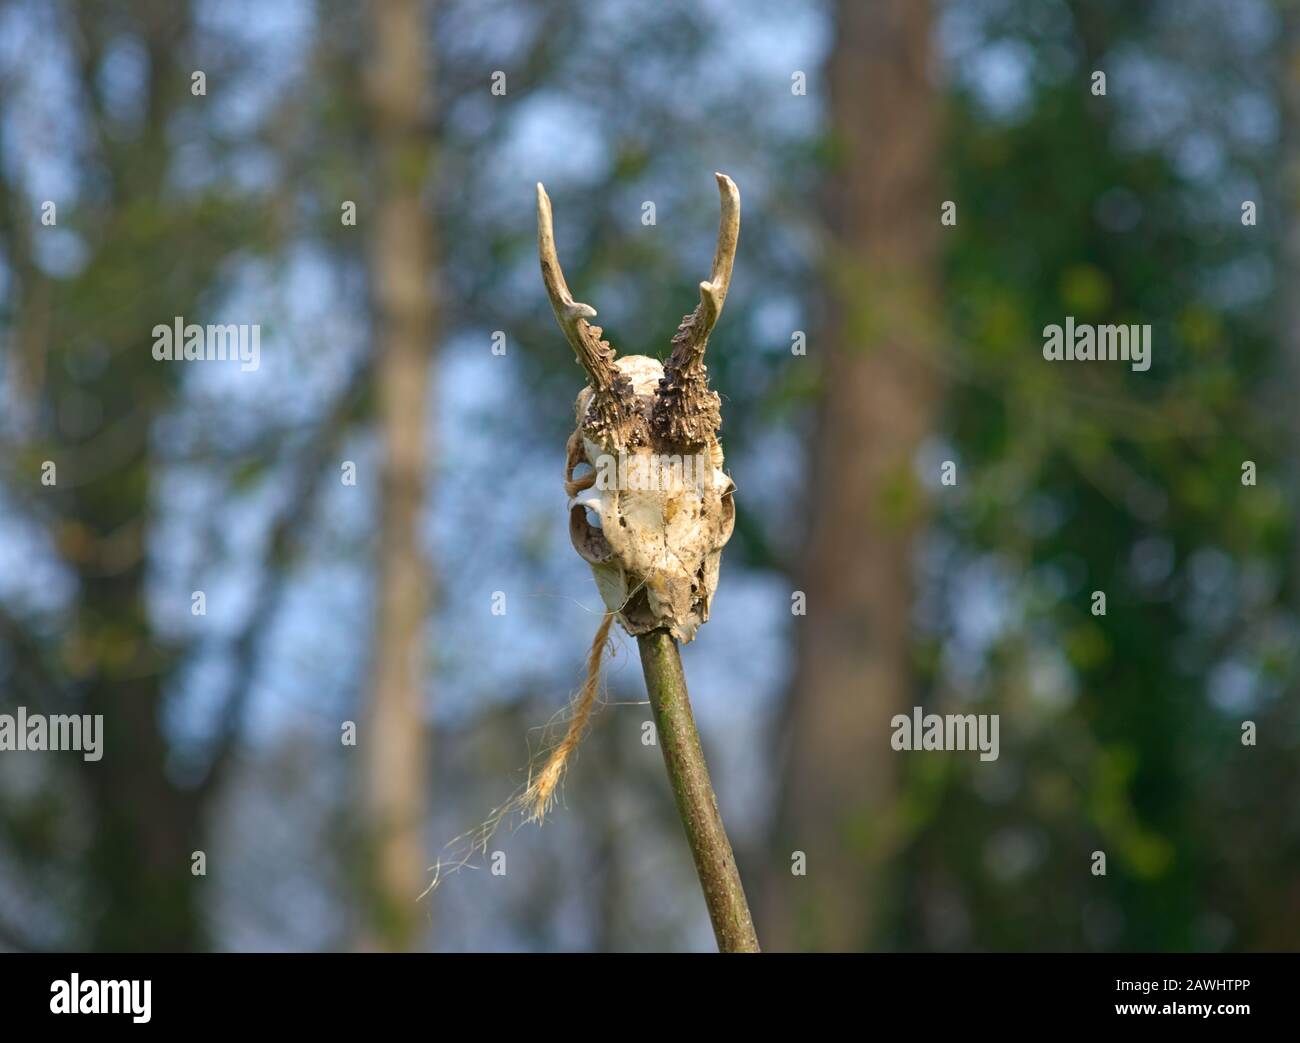 Animal skull with horns on wooden stick with greenery in background Stock Photo